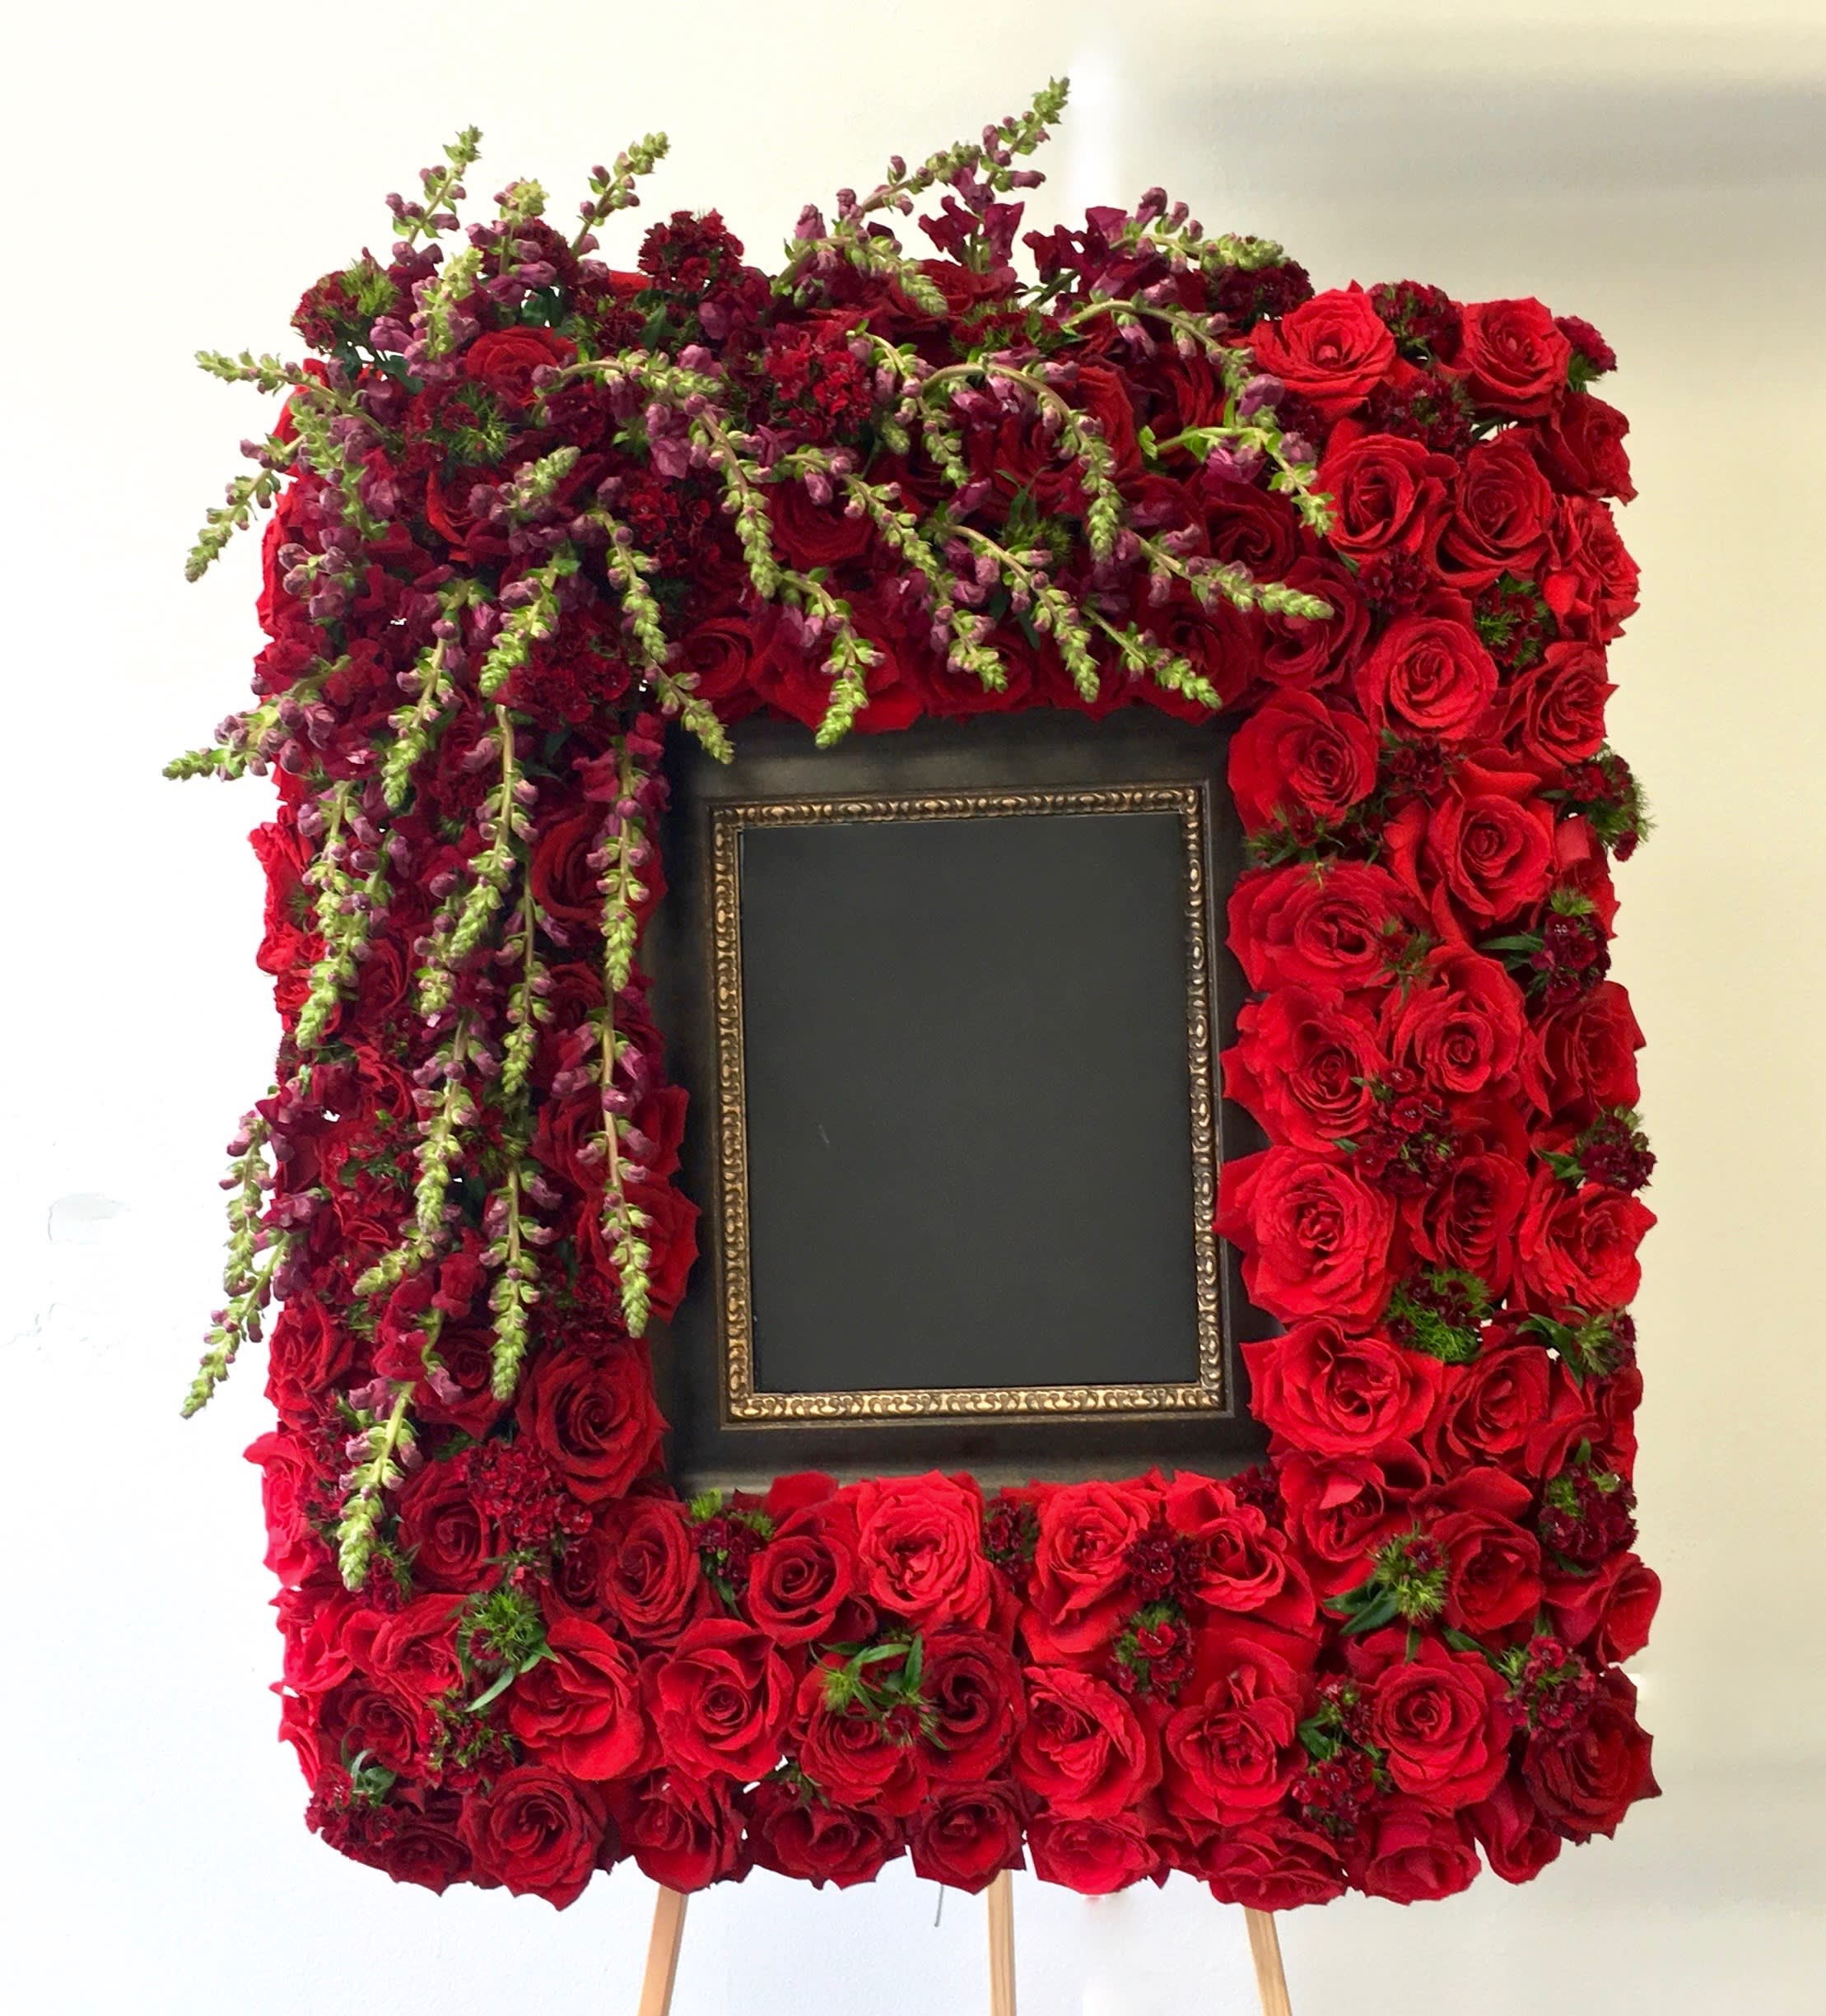 Red Rose Frame  - This frame includes red roses, snapdragons and dark seasonal greens. The standard size stands at approximately 36 inches tall and 24 inches wide. Additional flowers will be added for deluxe and premium sizes.   